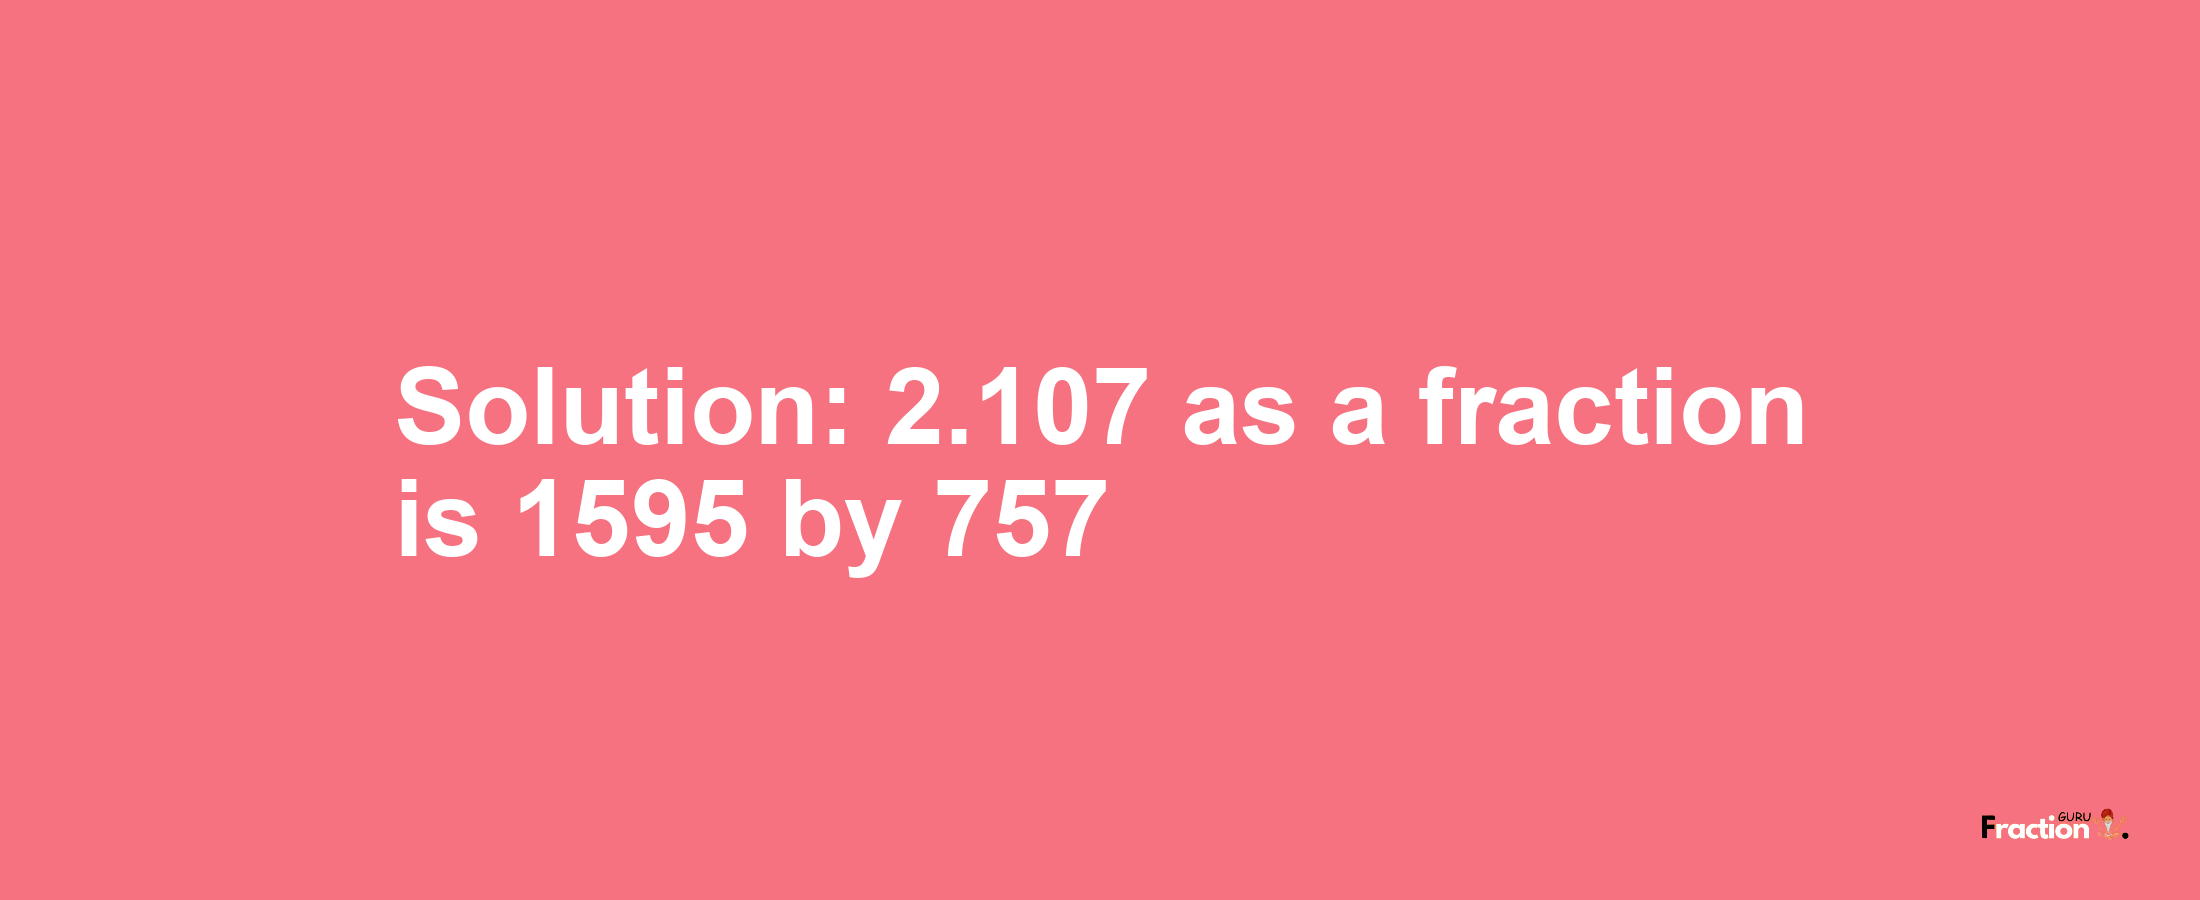 Solution:2.107 as a fraction is 1595/757